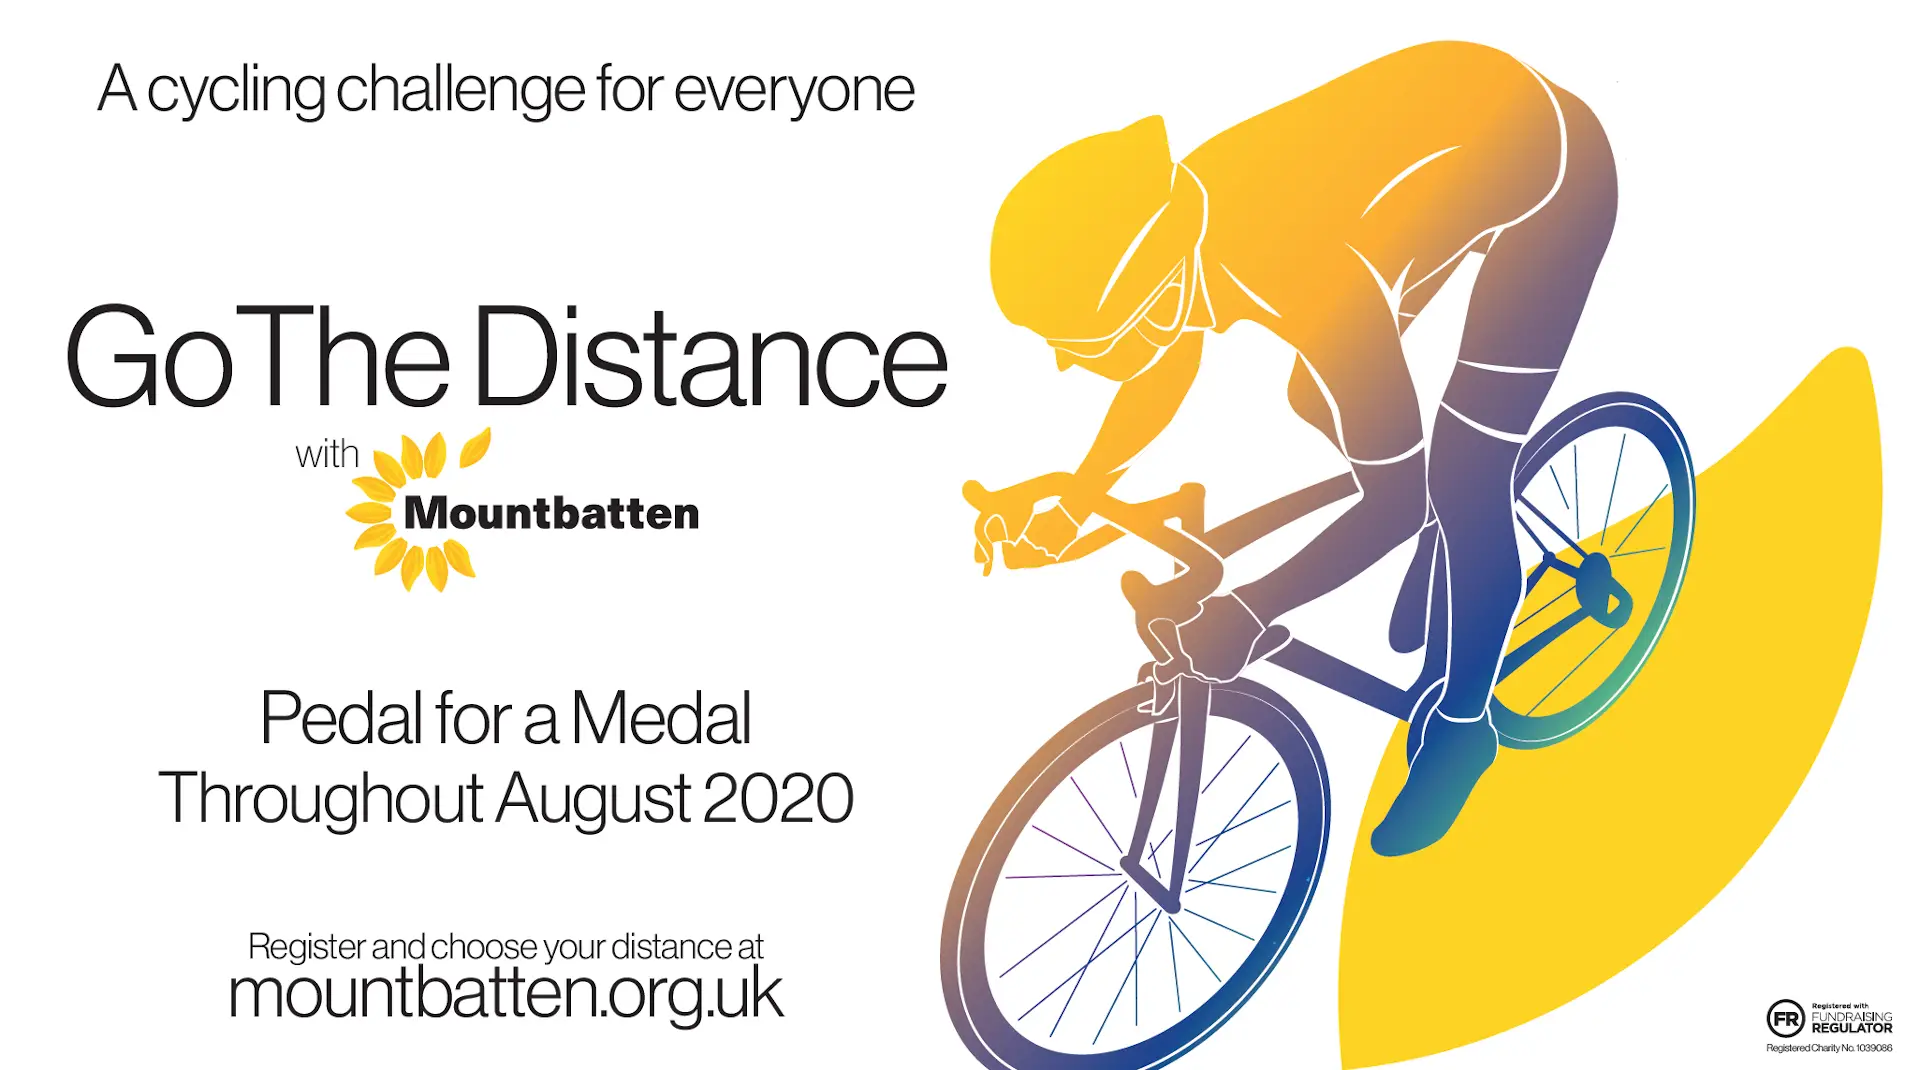 Will you 'Go the Distance' for Isle of Wight's Mountbatten this summer?